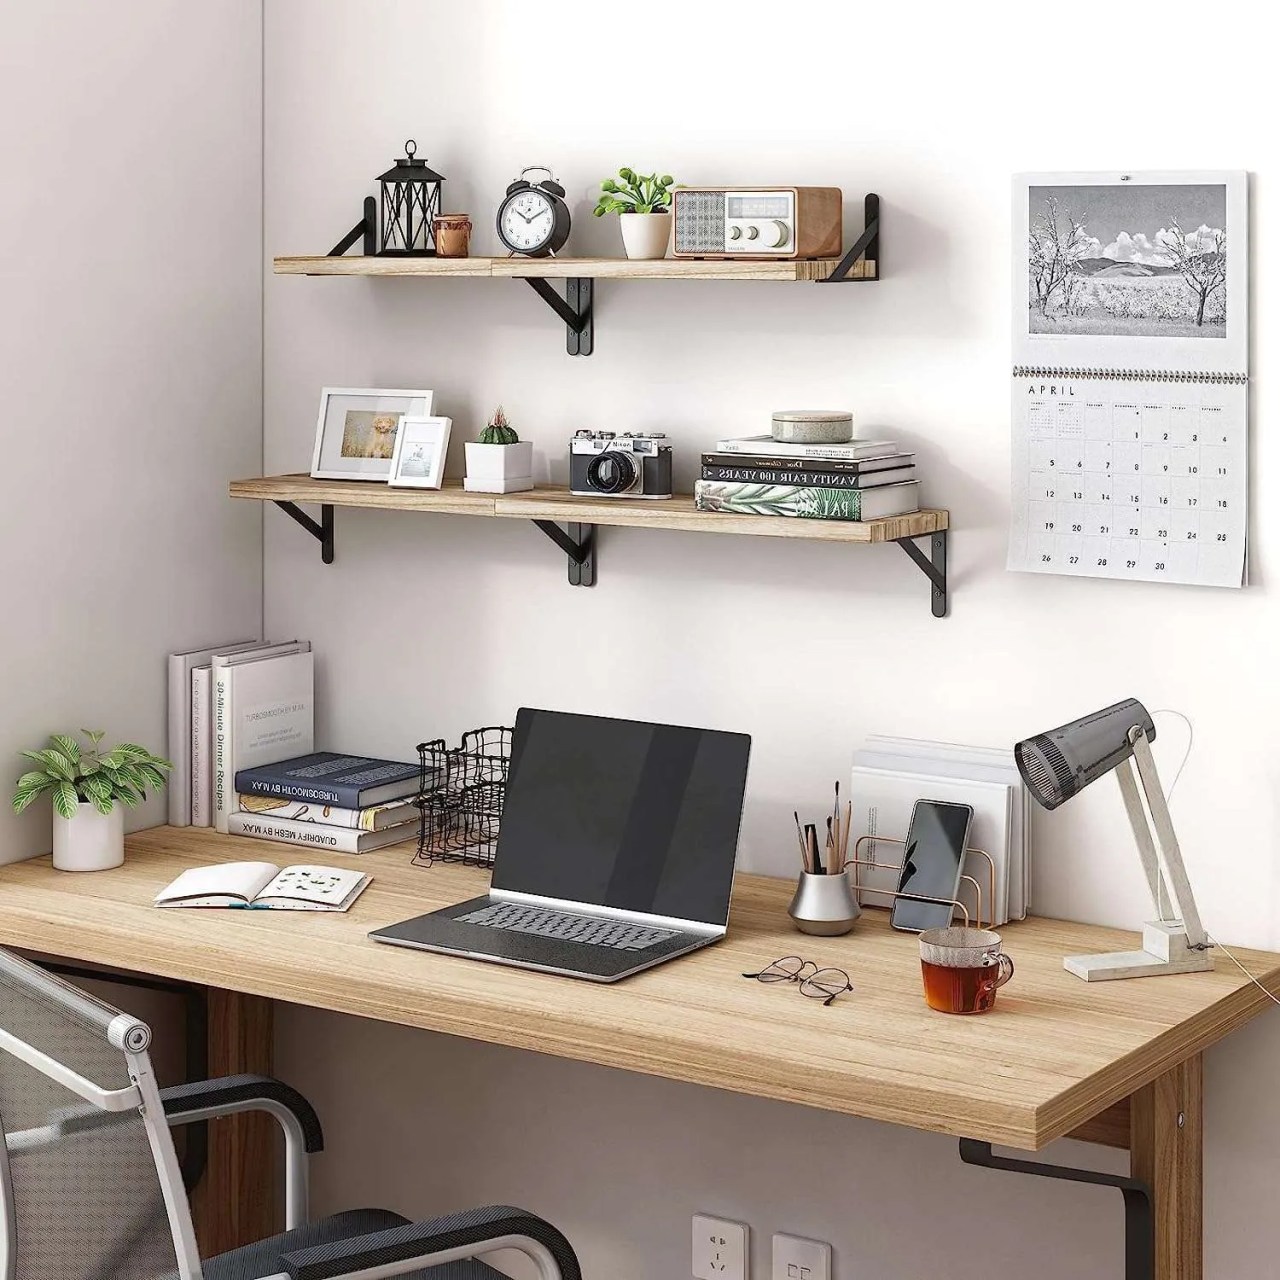 rustic wood shelves with black brackets above a home office desk